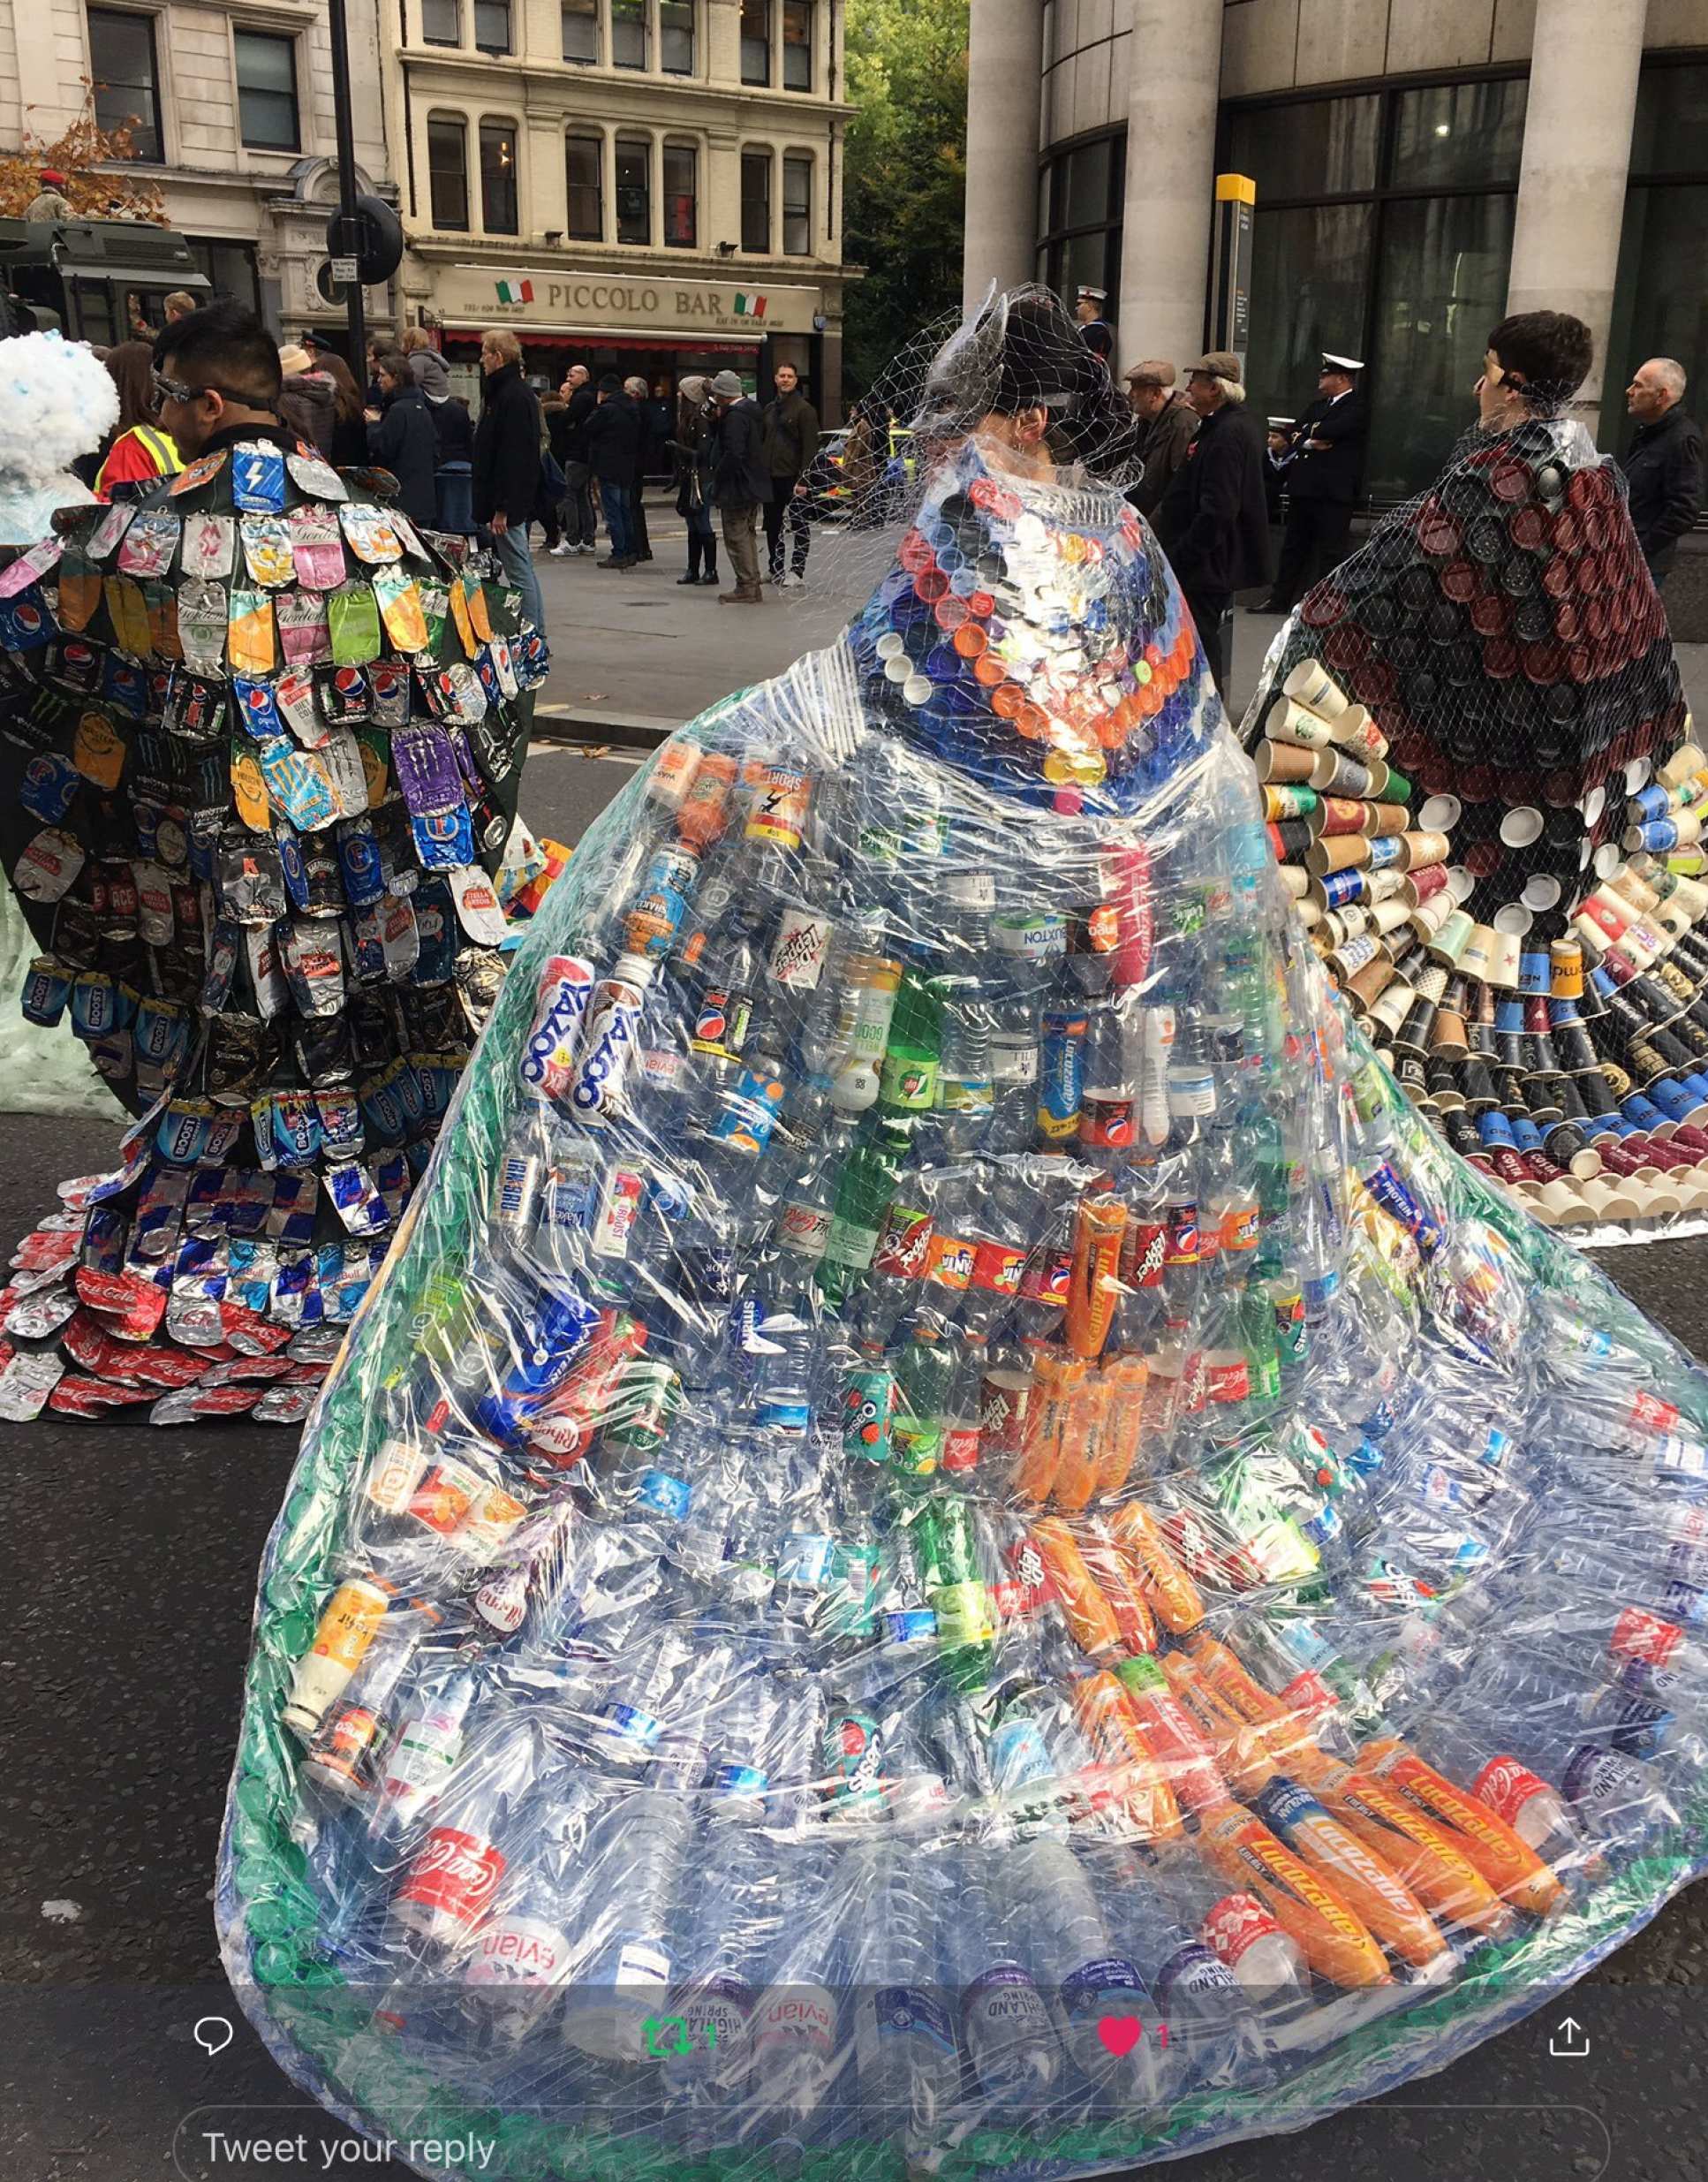 Three people wear cloaks made of trash. Left: crushed drinks cans. Centre: Plastic bottles. Right: disposable cups